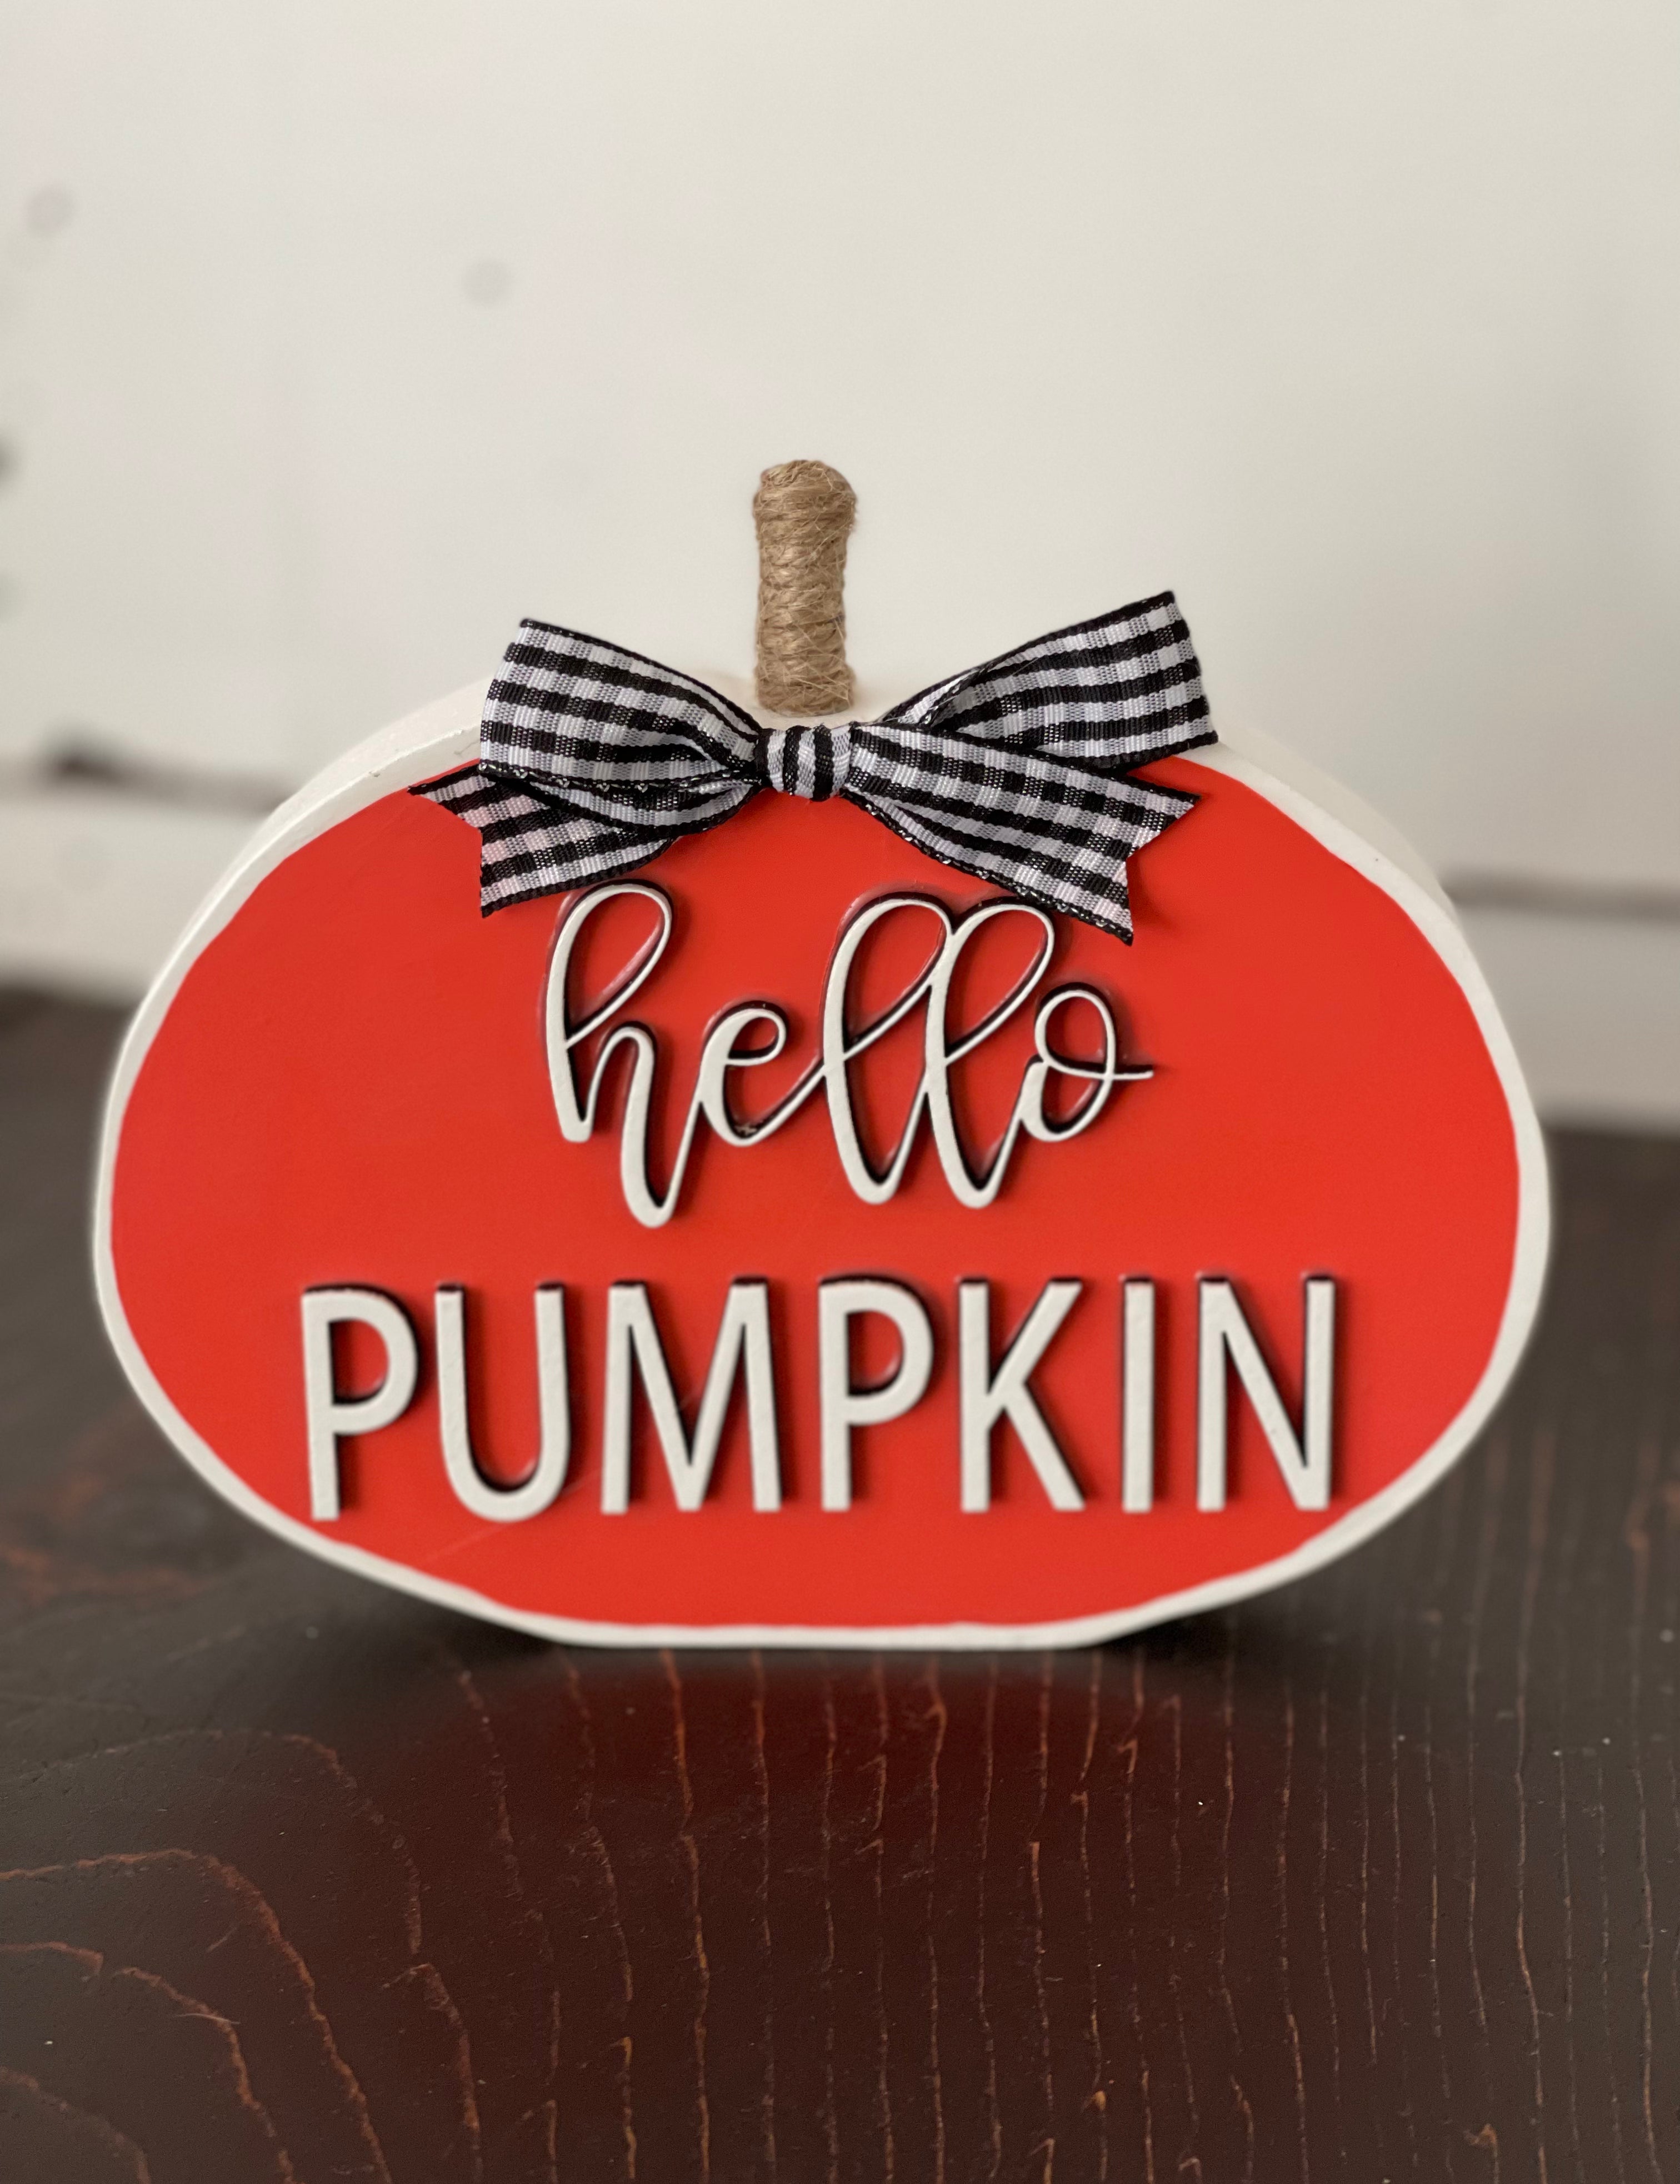 This image shows the hello pumpkin standing up front view.